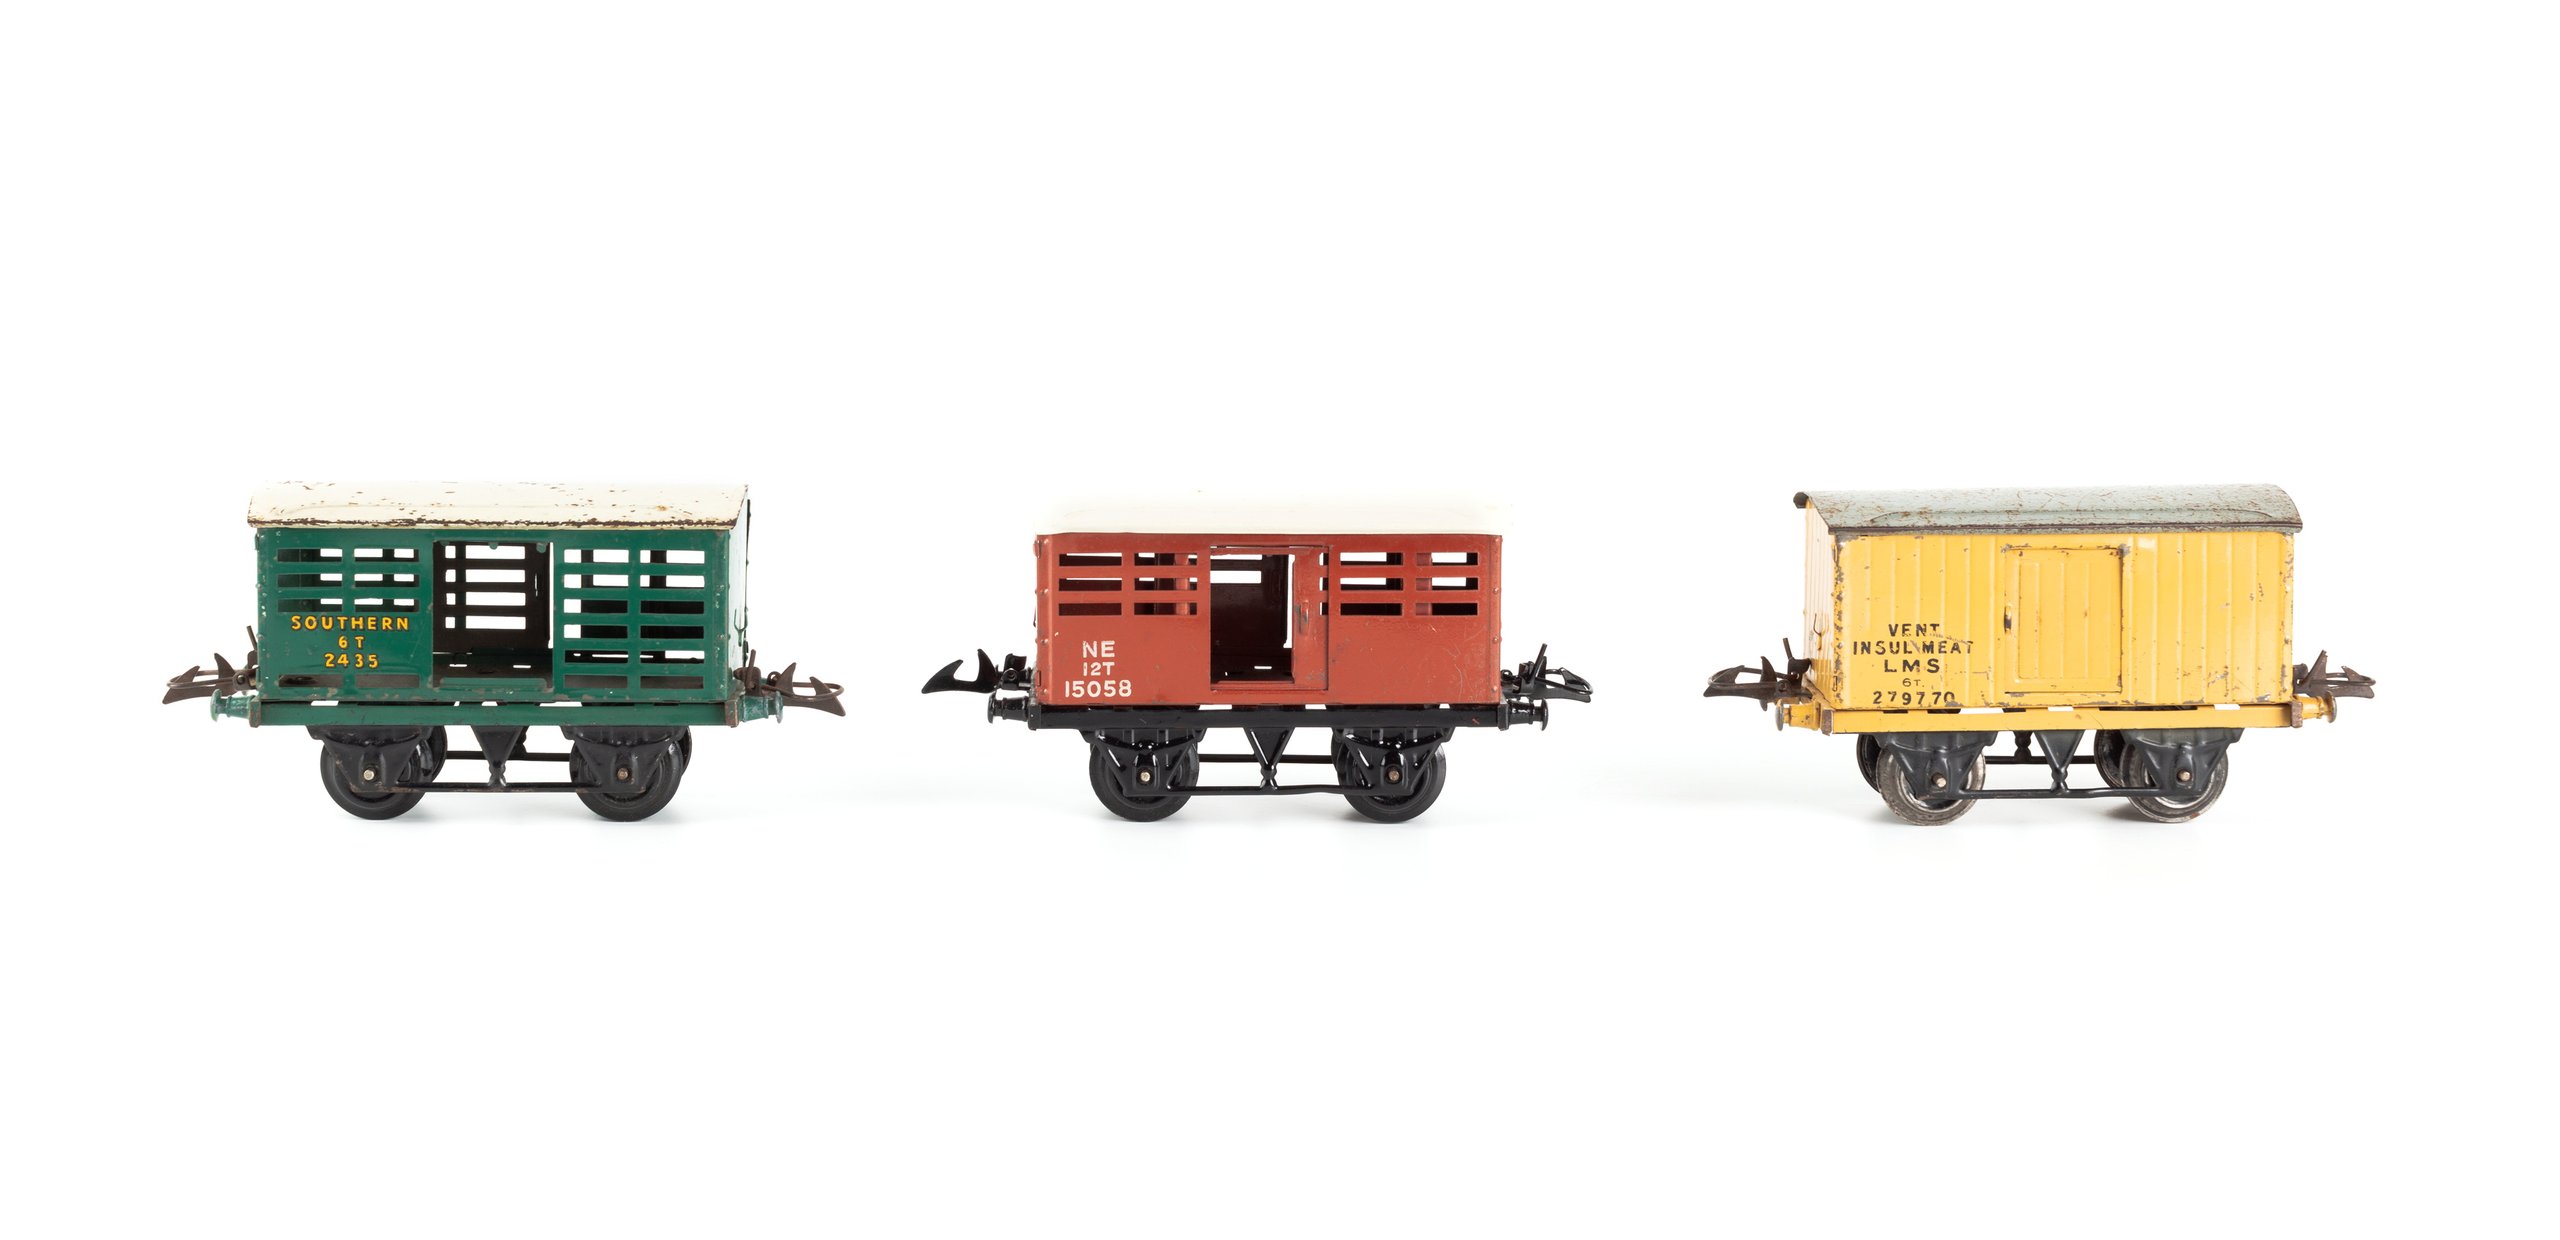 Hornby railway carriages and wagons by Meccano